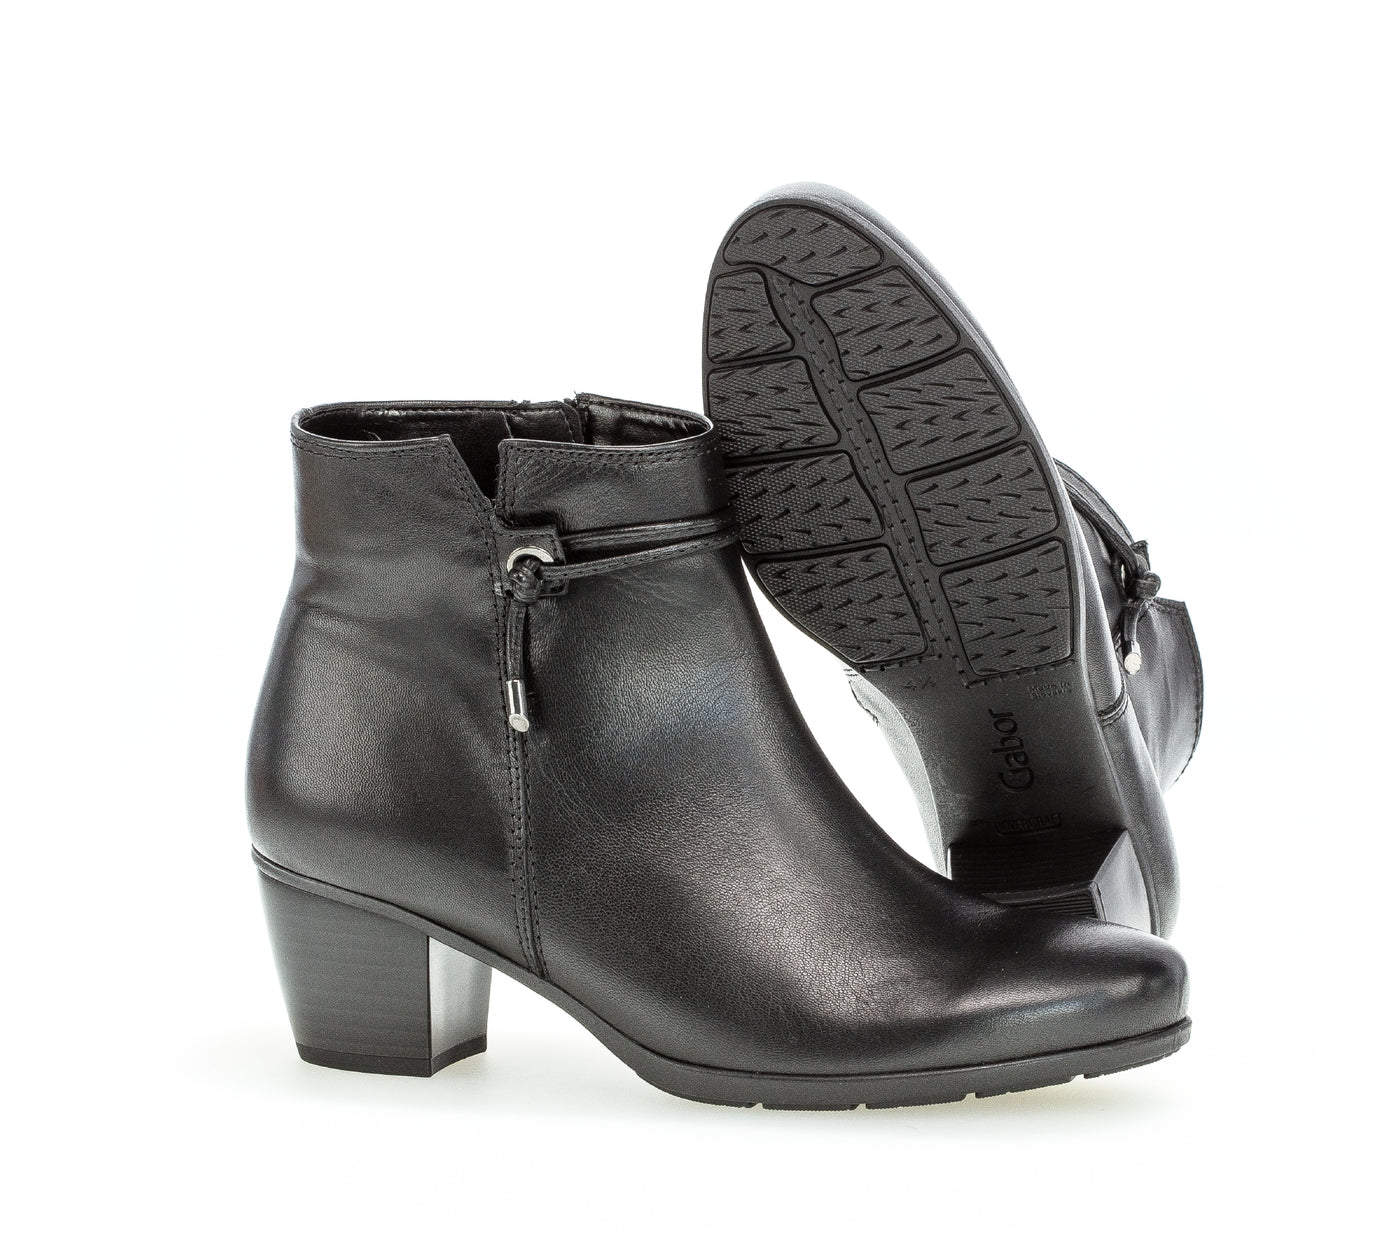 GABOR - 75.522.27 LOW HEEL ANKLE BOOT - BLACK LEATHER